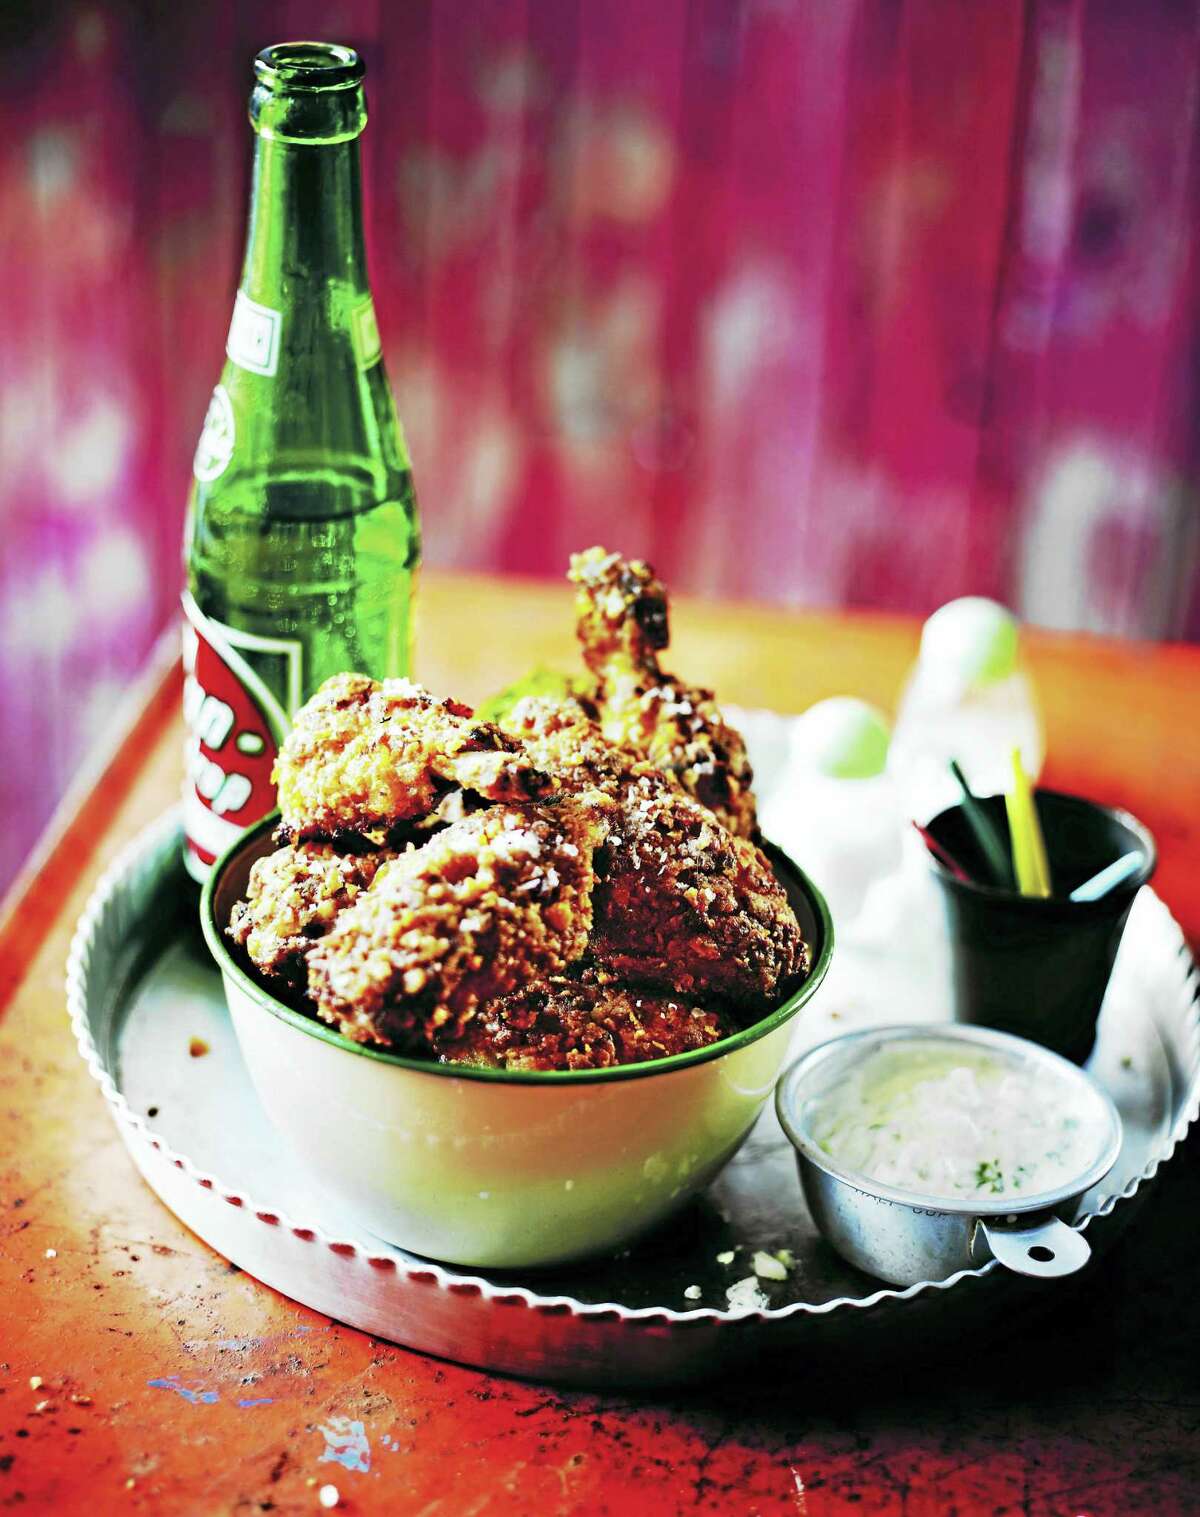 Buttermilk-crumbed wings are perfect for kicking off Super Bowl Sunday.